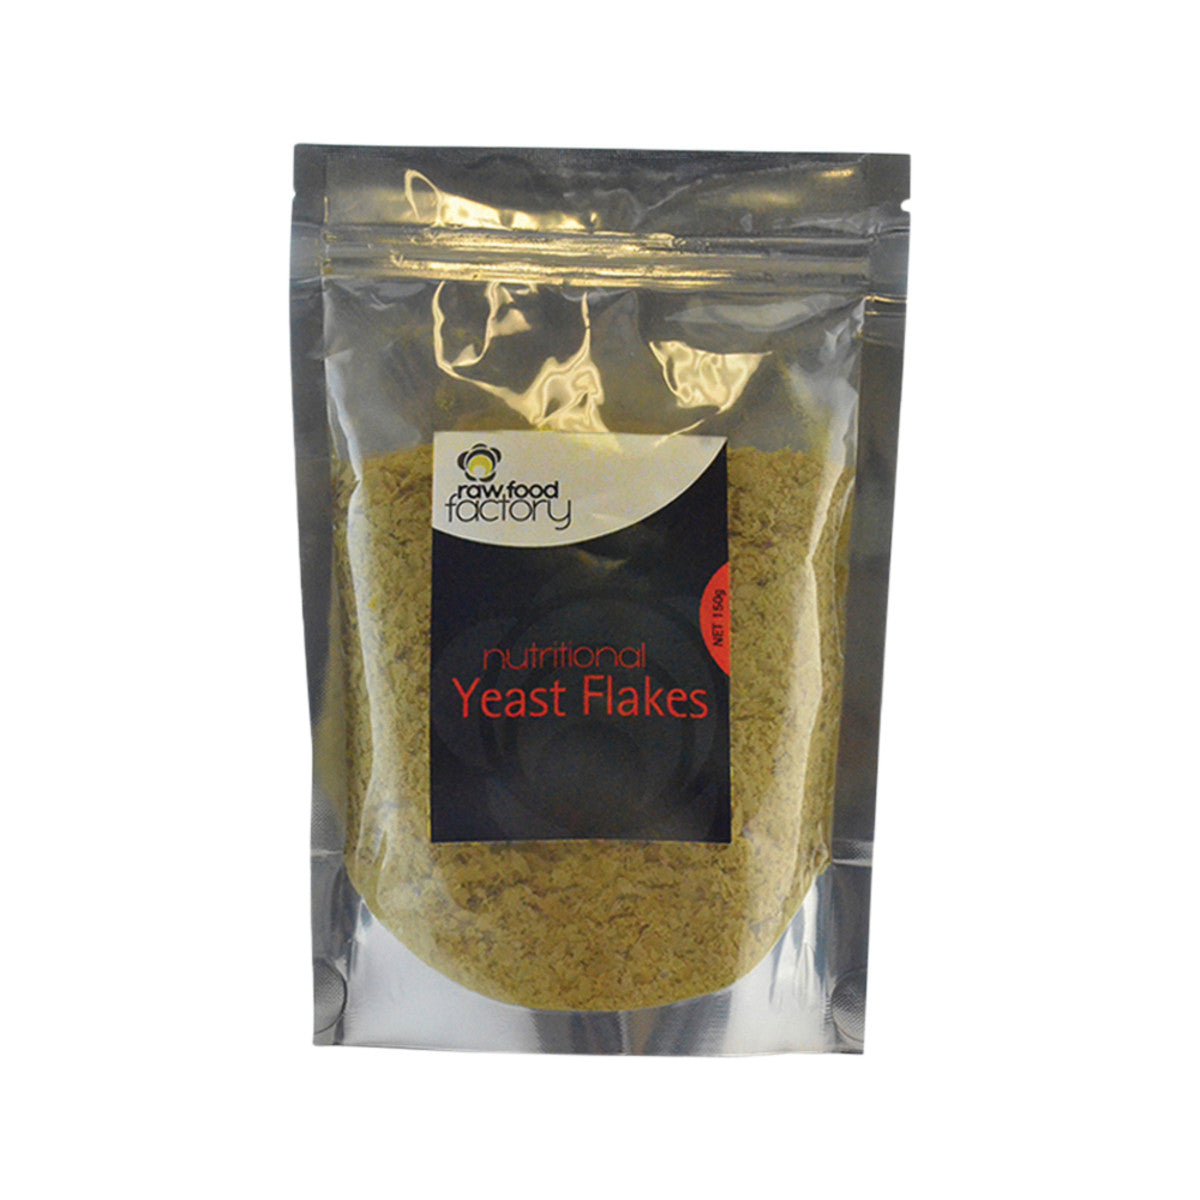 Raw Food Factory Nutritional Yeast Flakes 150g